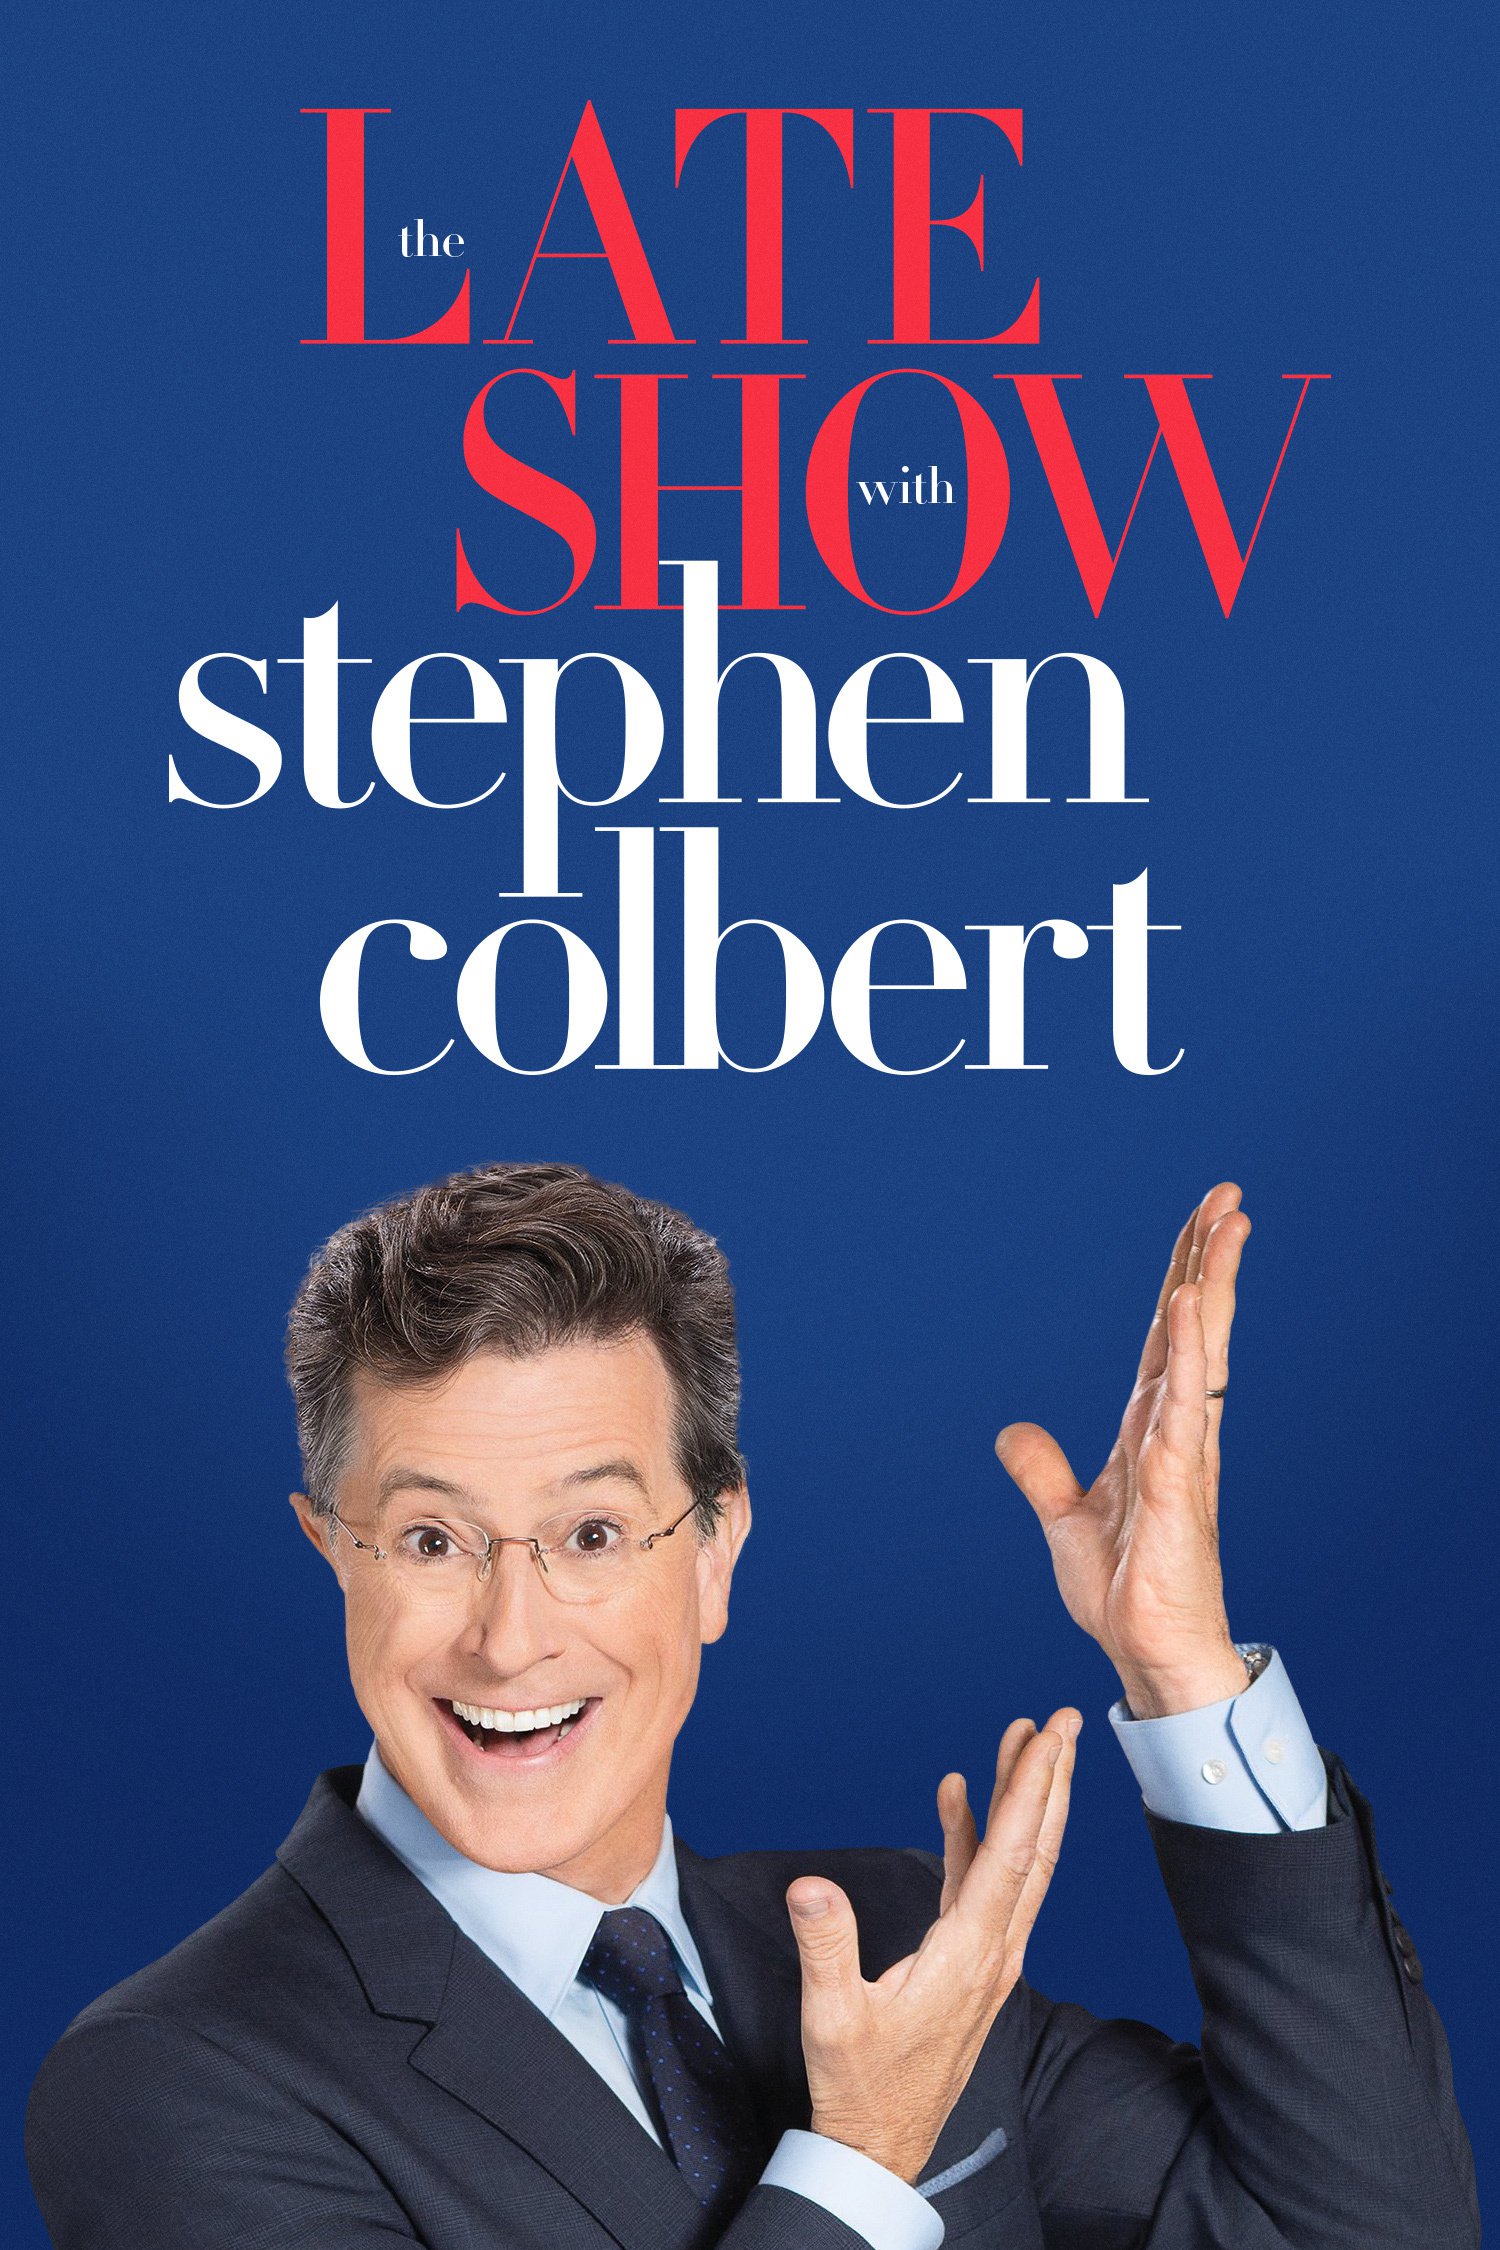 The Late Show with Stephen Colbert - Season 1 (2016) - Part 2